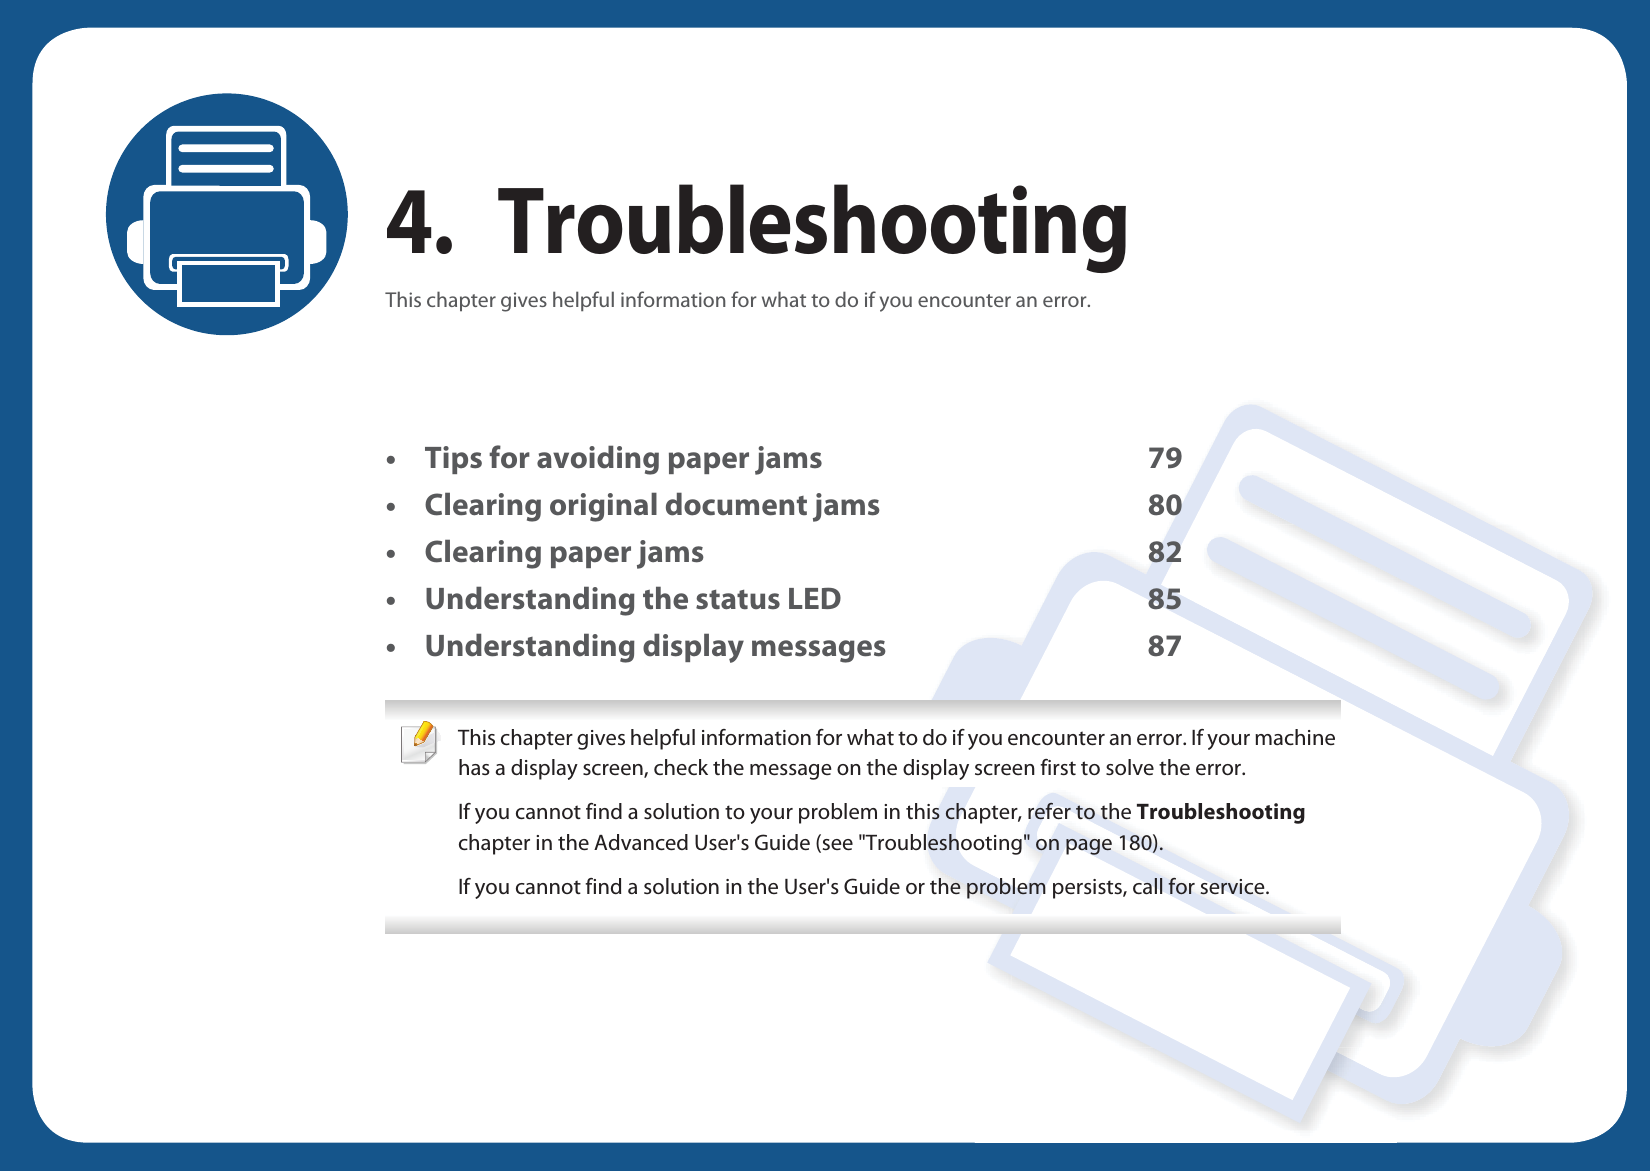 4. TroubleshootingThis chapter gives helpful information for what to do if you encounter an error.• Tips for avoiding paper jams 79• Clearing original document jams 80• Clearing paper jams 82• Understanding the status LED 85• Understanding display messages 87 This chapter gives helpful information for what to do if you encounter an error. If your machine has a display screen, check the message on the display screen first to solve the error.If you cannot find a solution to your problem in this chapter, refer to the Troubleshooting chapter in the Advanced User&apos;s Guide (see &quot;Troubleshooting&quot; on page 180).If you cannot find a solution in the User&apos;s Guide or the problem persists, call for service.  